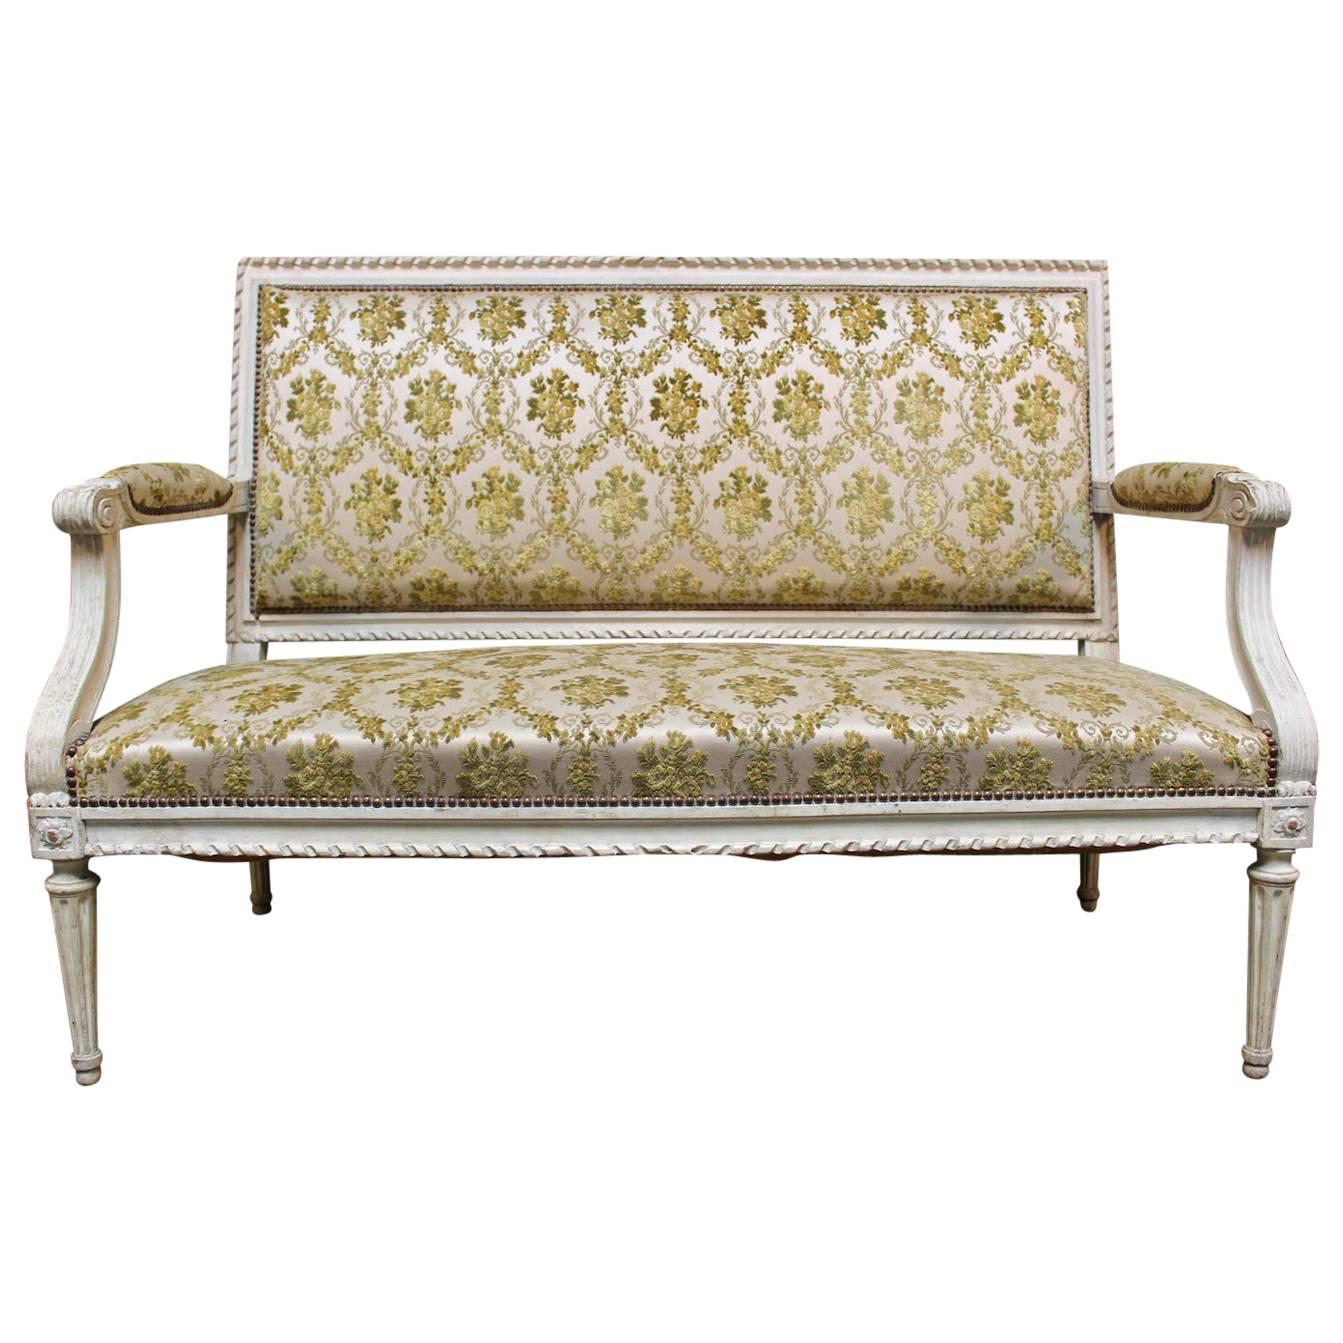 A French Louis XVI Settee with a Painted Finish